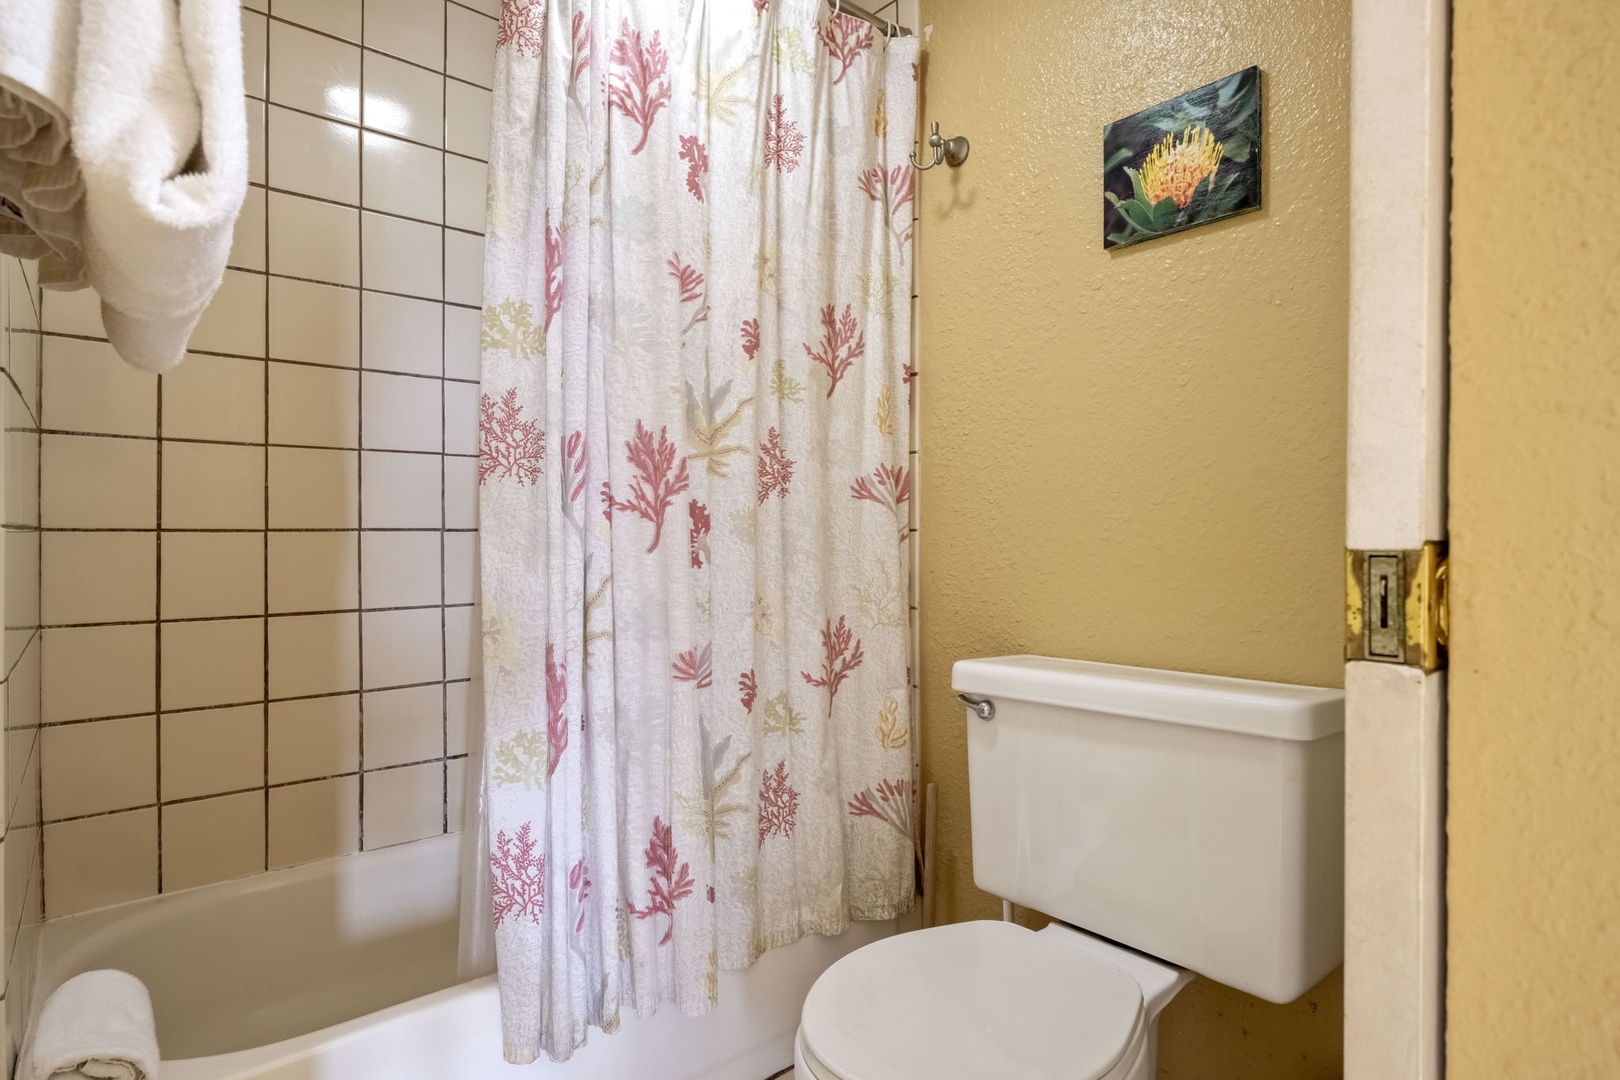 Bathroom with Sower/Tub Combo